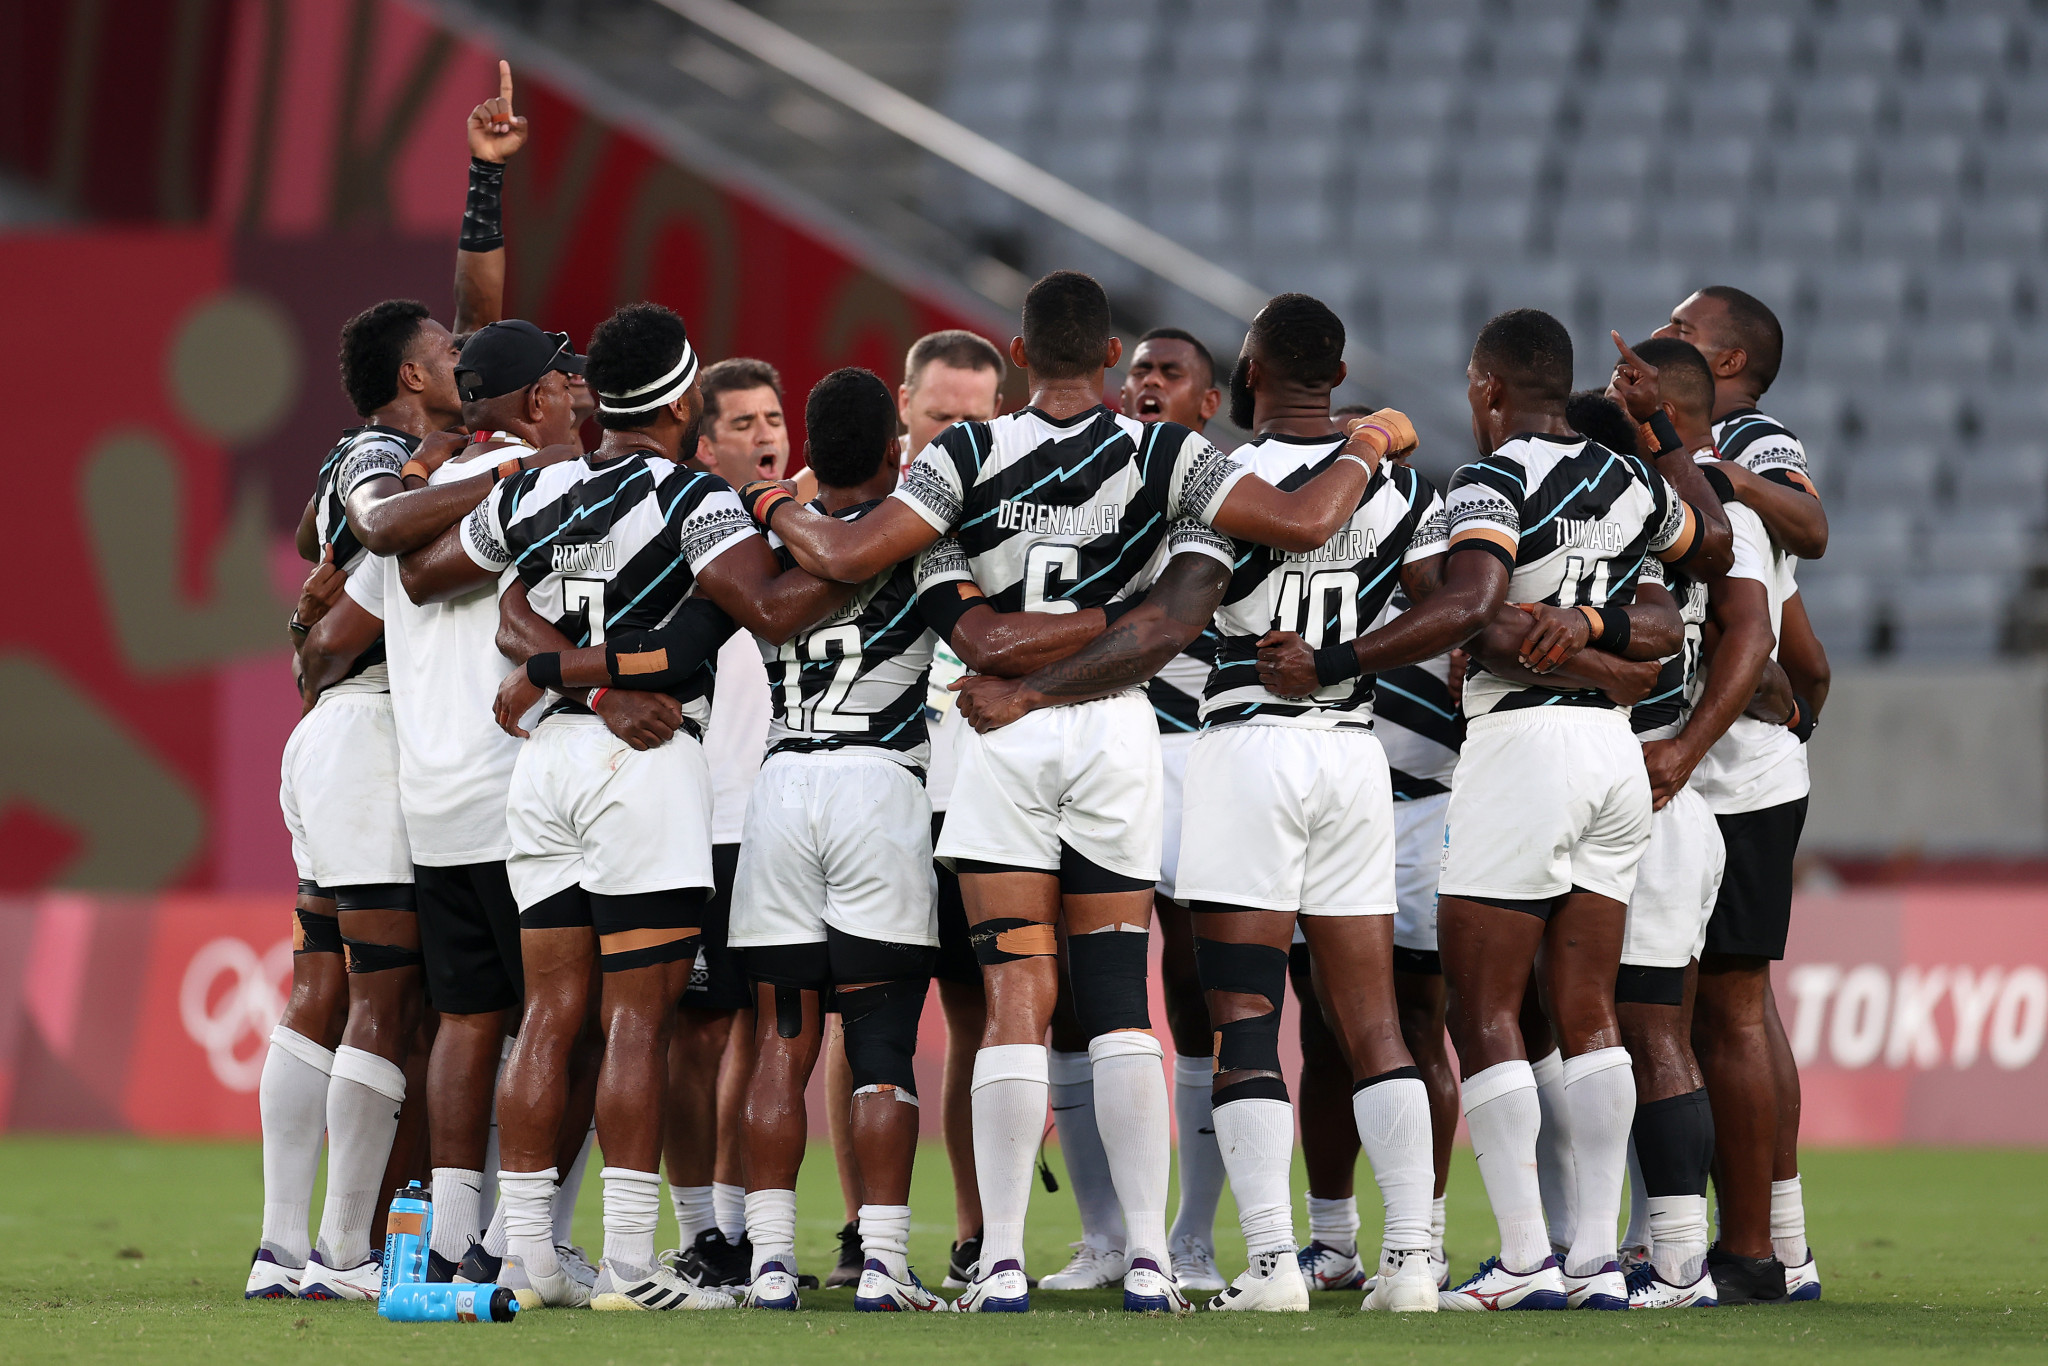 World Rugby Sevens Series to make return as new campaign begins in Dubai